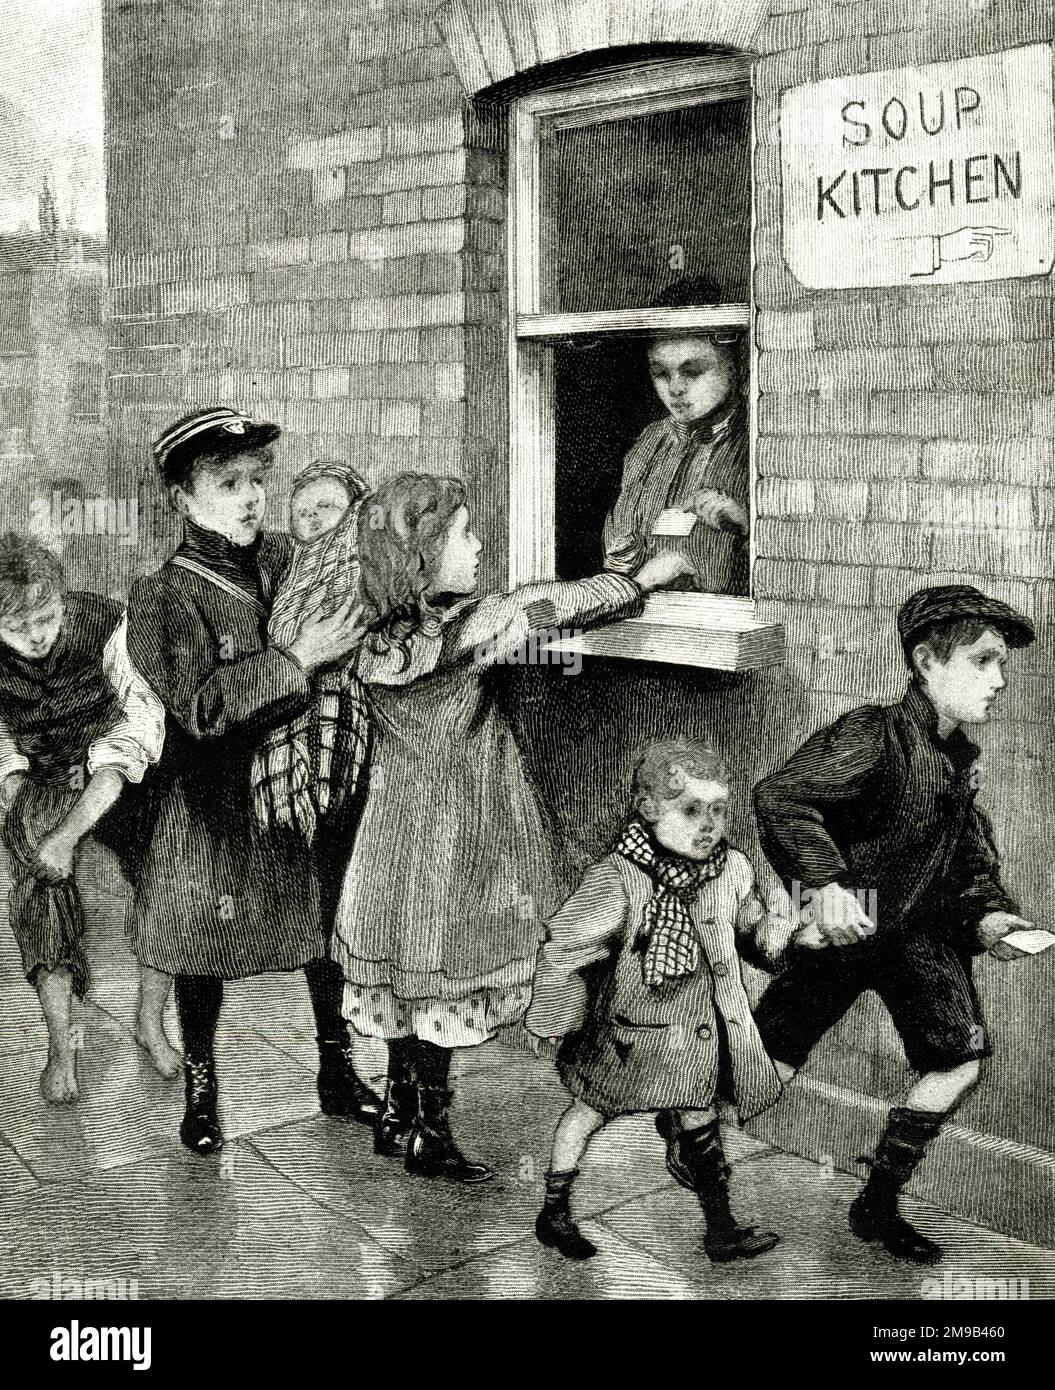 A Farthing Dinner Please, the Soup Kitchen Stock Photo